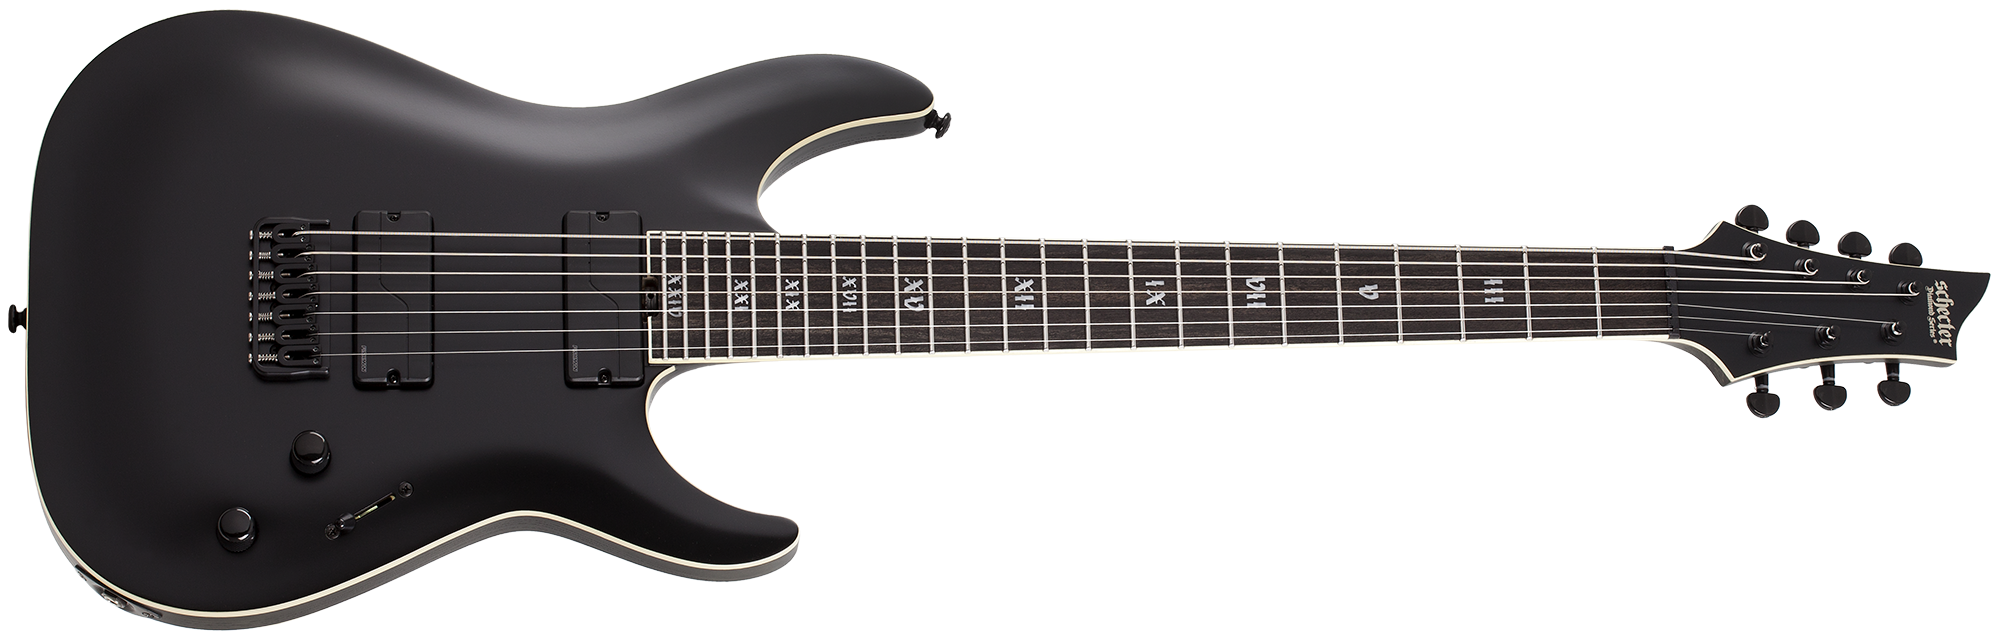 Schecter Evil Twin 7 String Electric Guitar with Swamp Ash Body - Satin Black 1349-SHC - The Guitar World